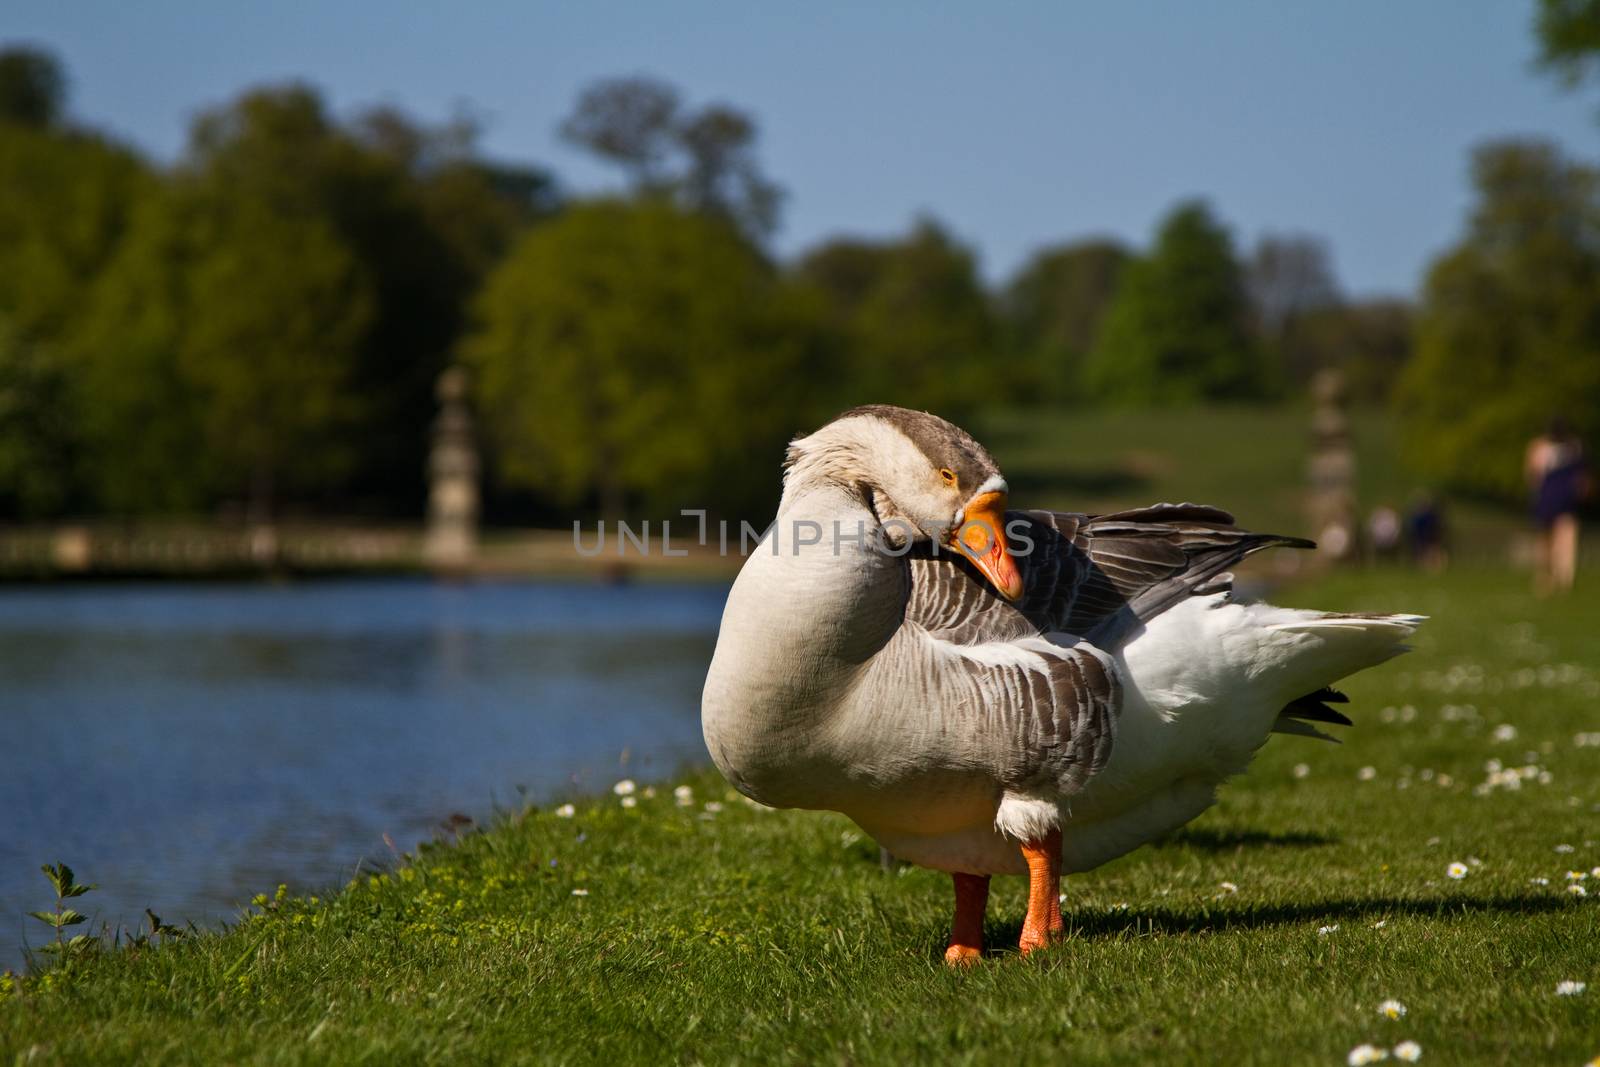 A Goose at a River by samULvisuals